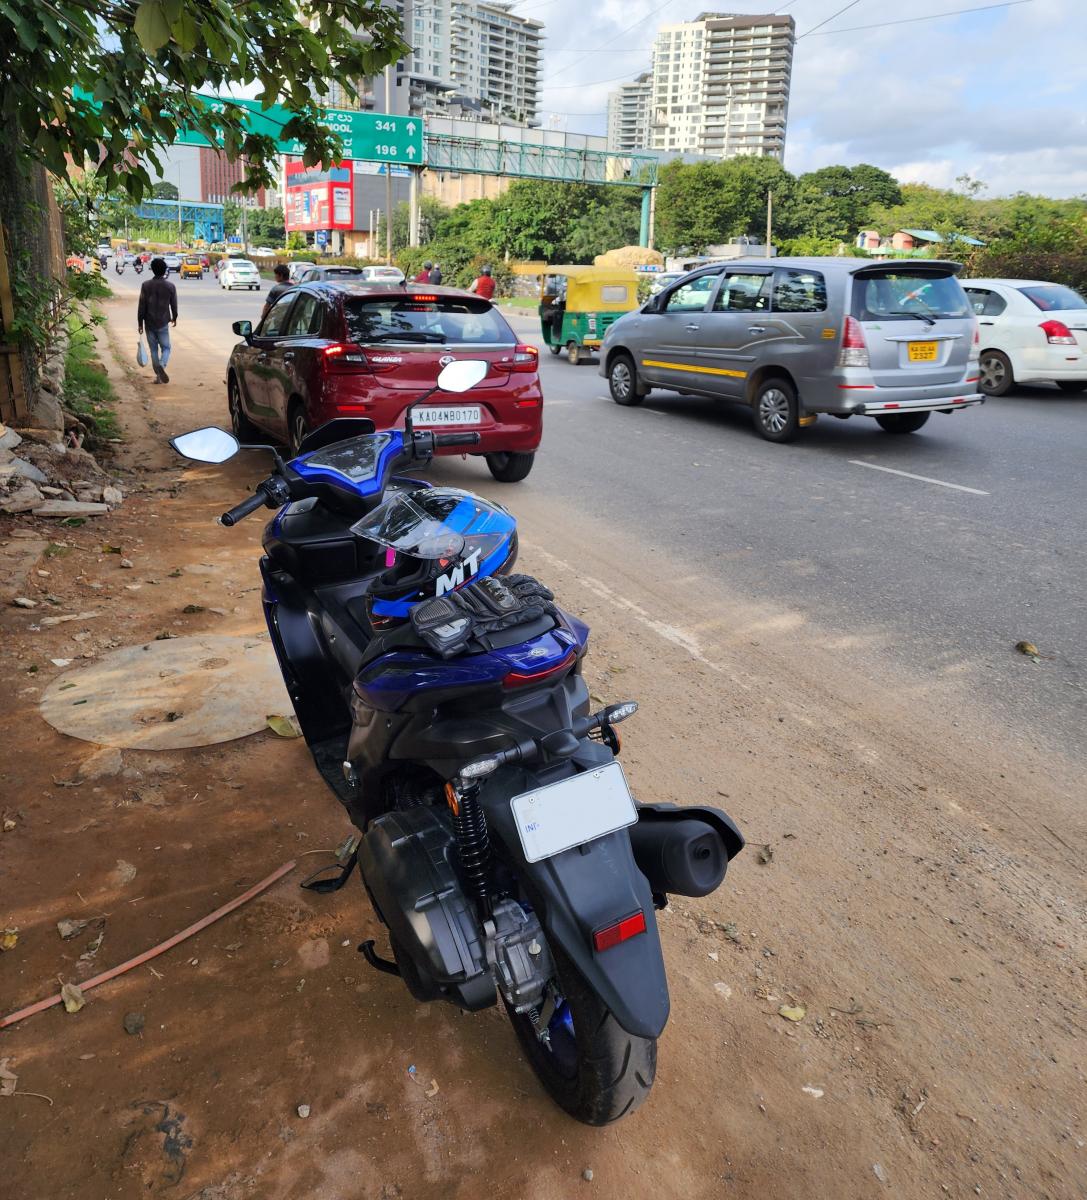 Riding an Aerox 155 scooter for 750 km in 12 hours: My experience, Indian, Member Content, Yamaha Aerox, ride